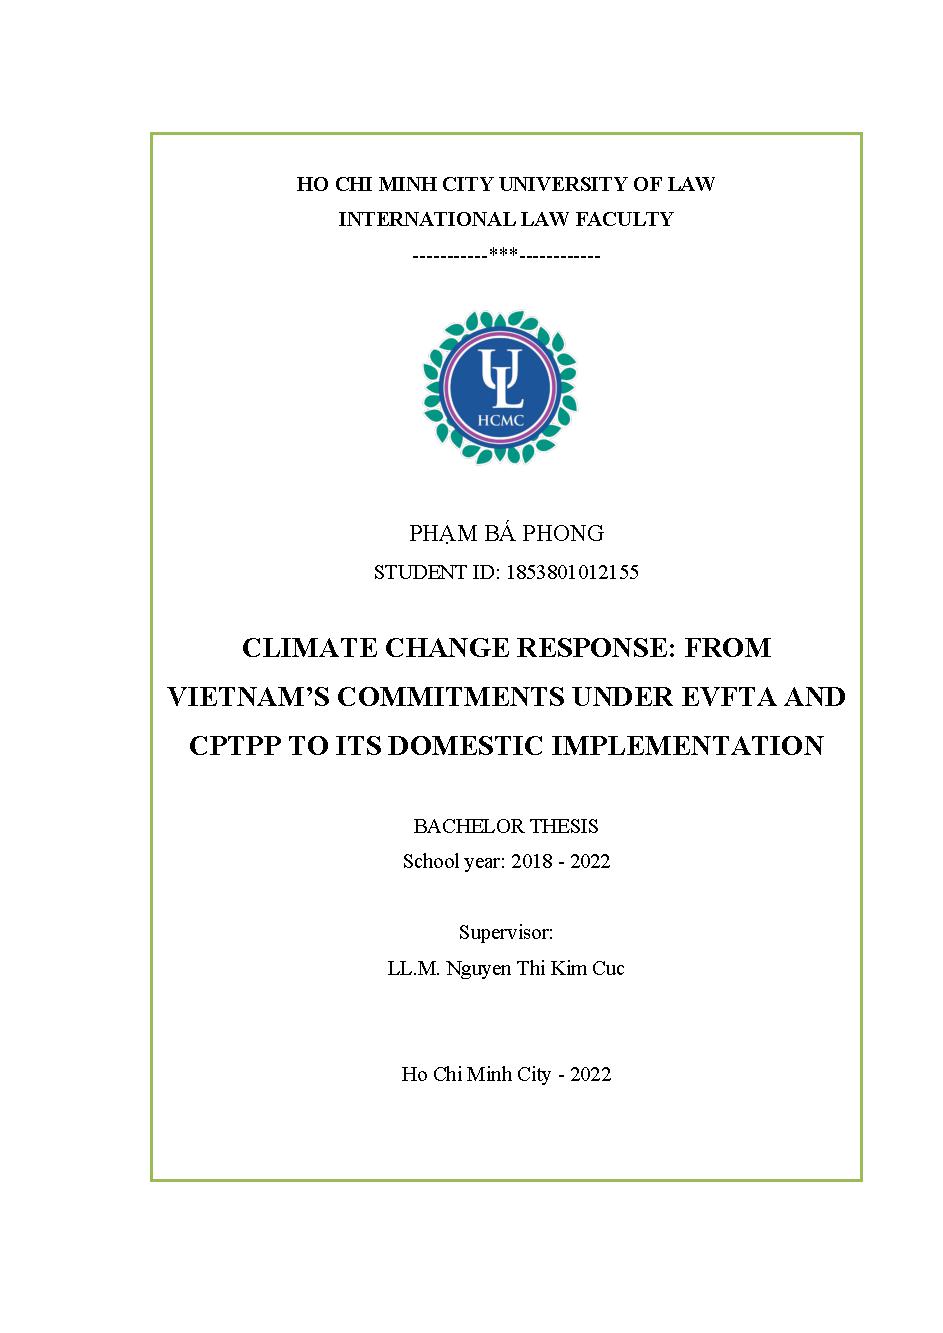 Climate change response: frome Vietnam’s commitments under EVFTA and CPTPP to its domestic implementation